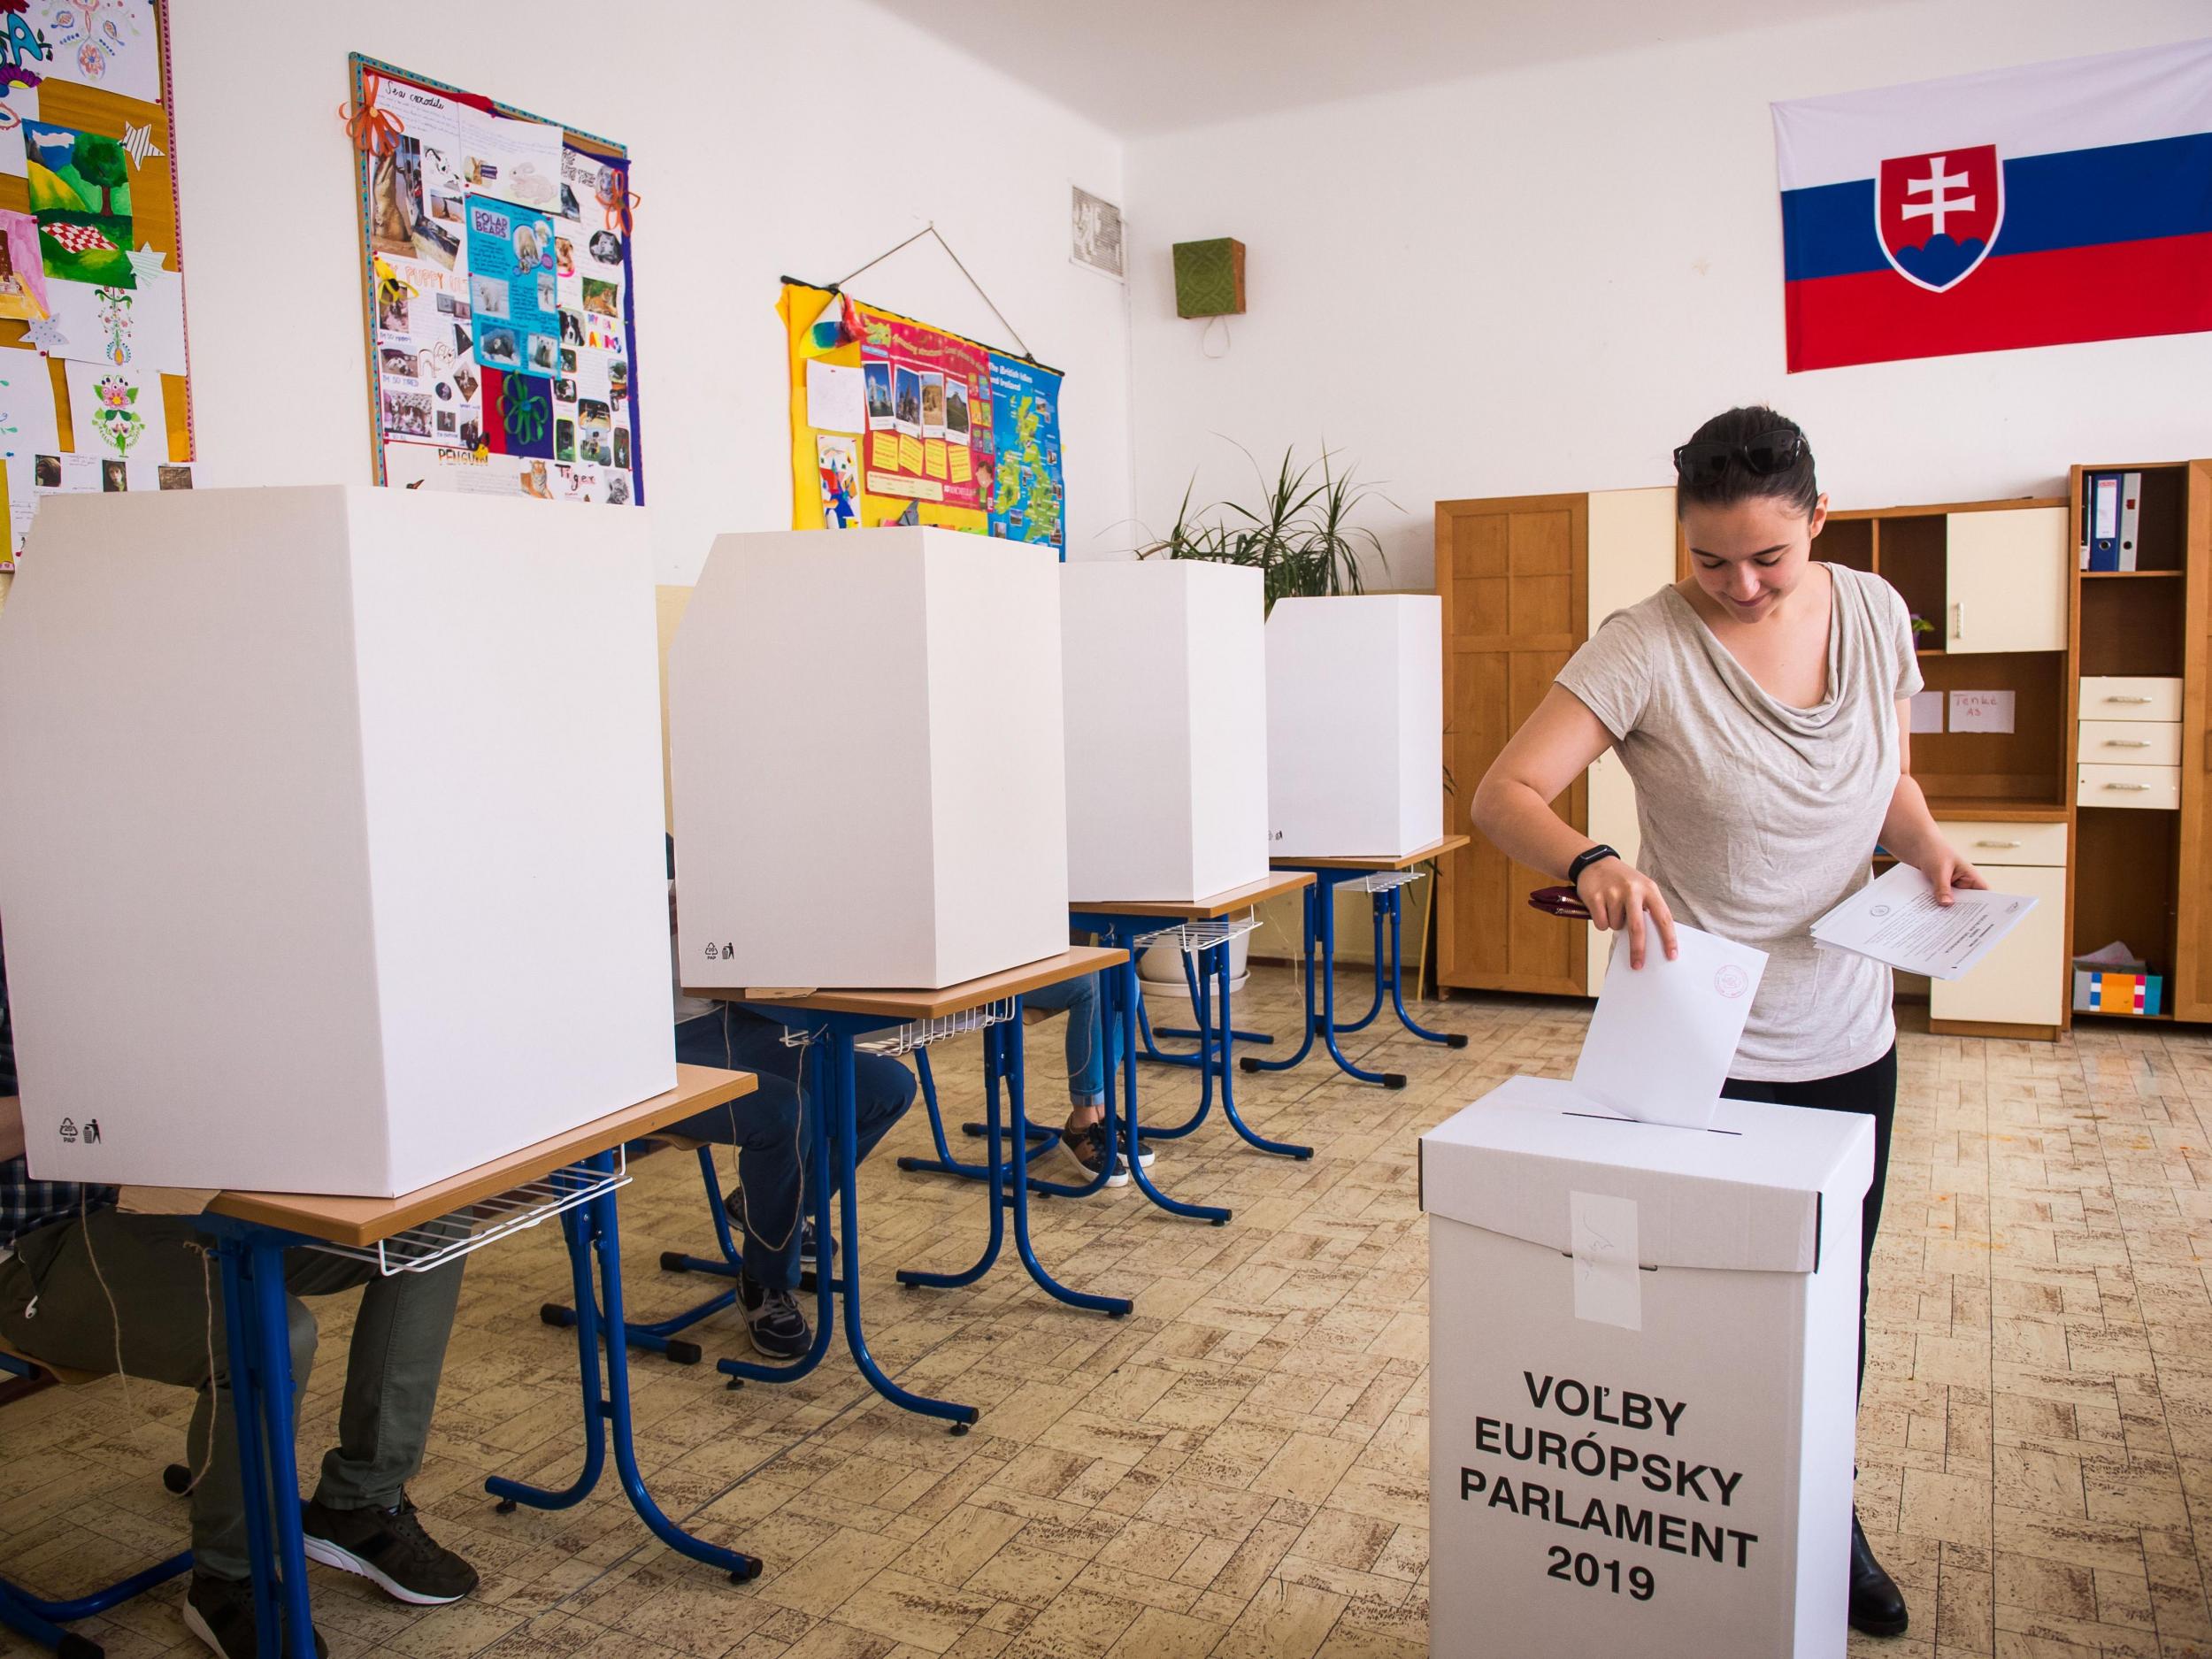 A woman casts her ballot at a polling station in Bratislava during the European Elections. (Getty/iStock)